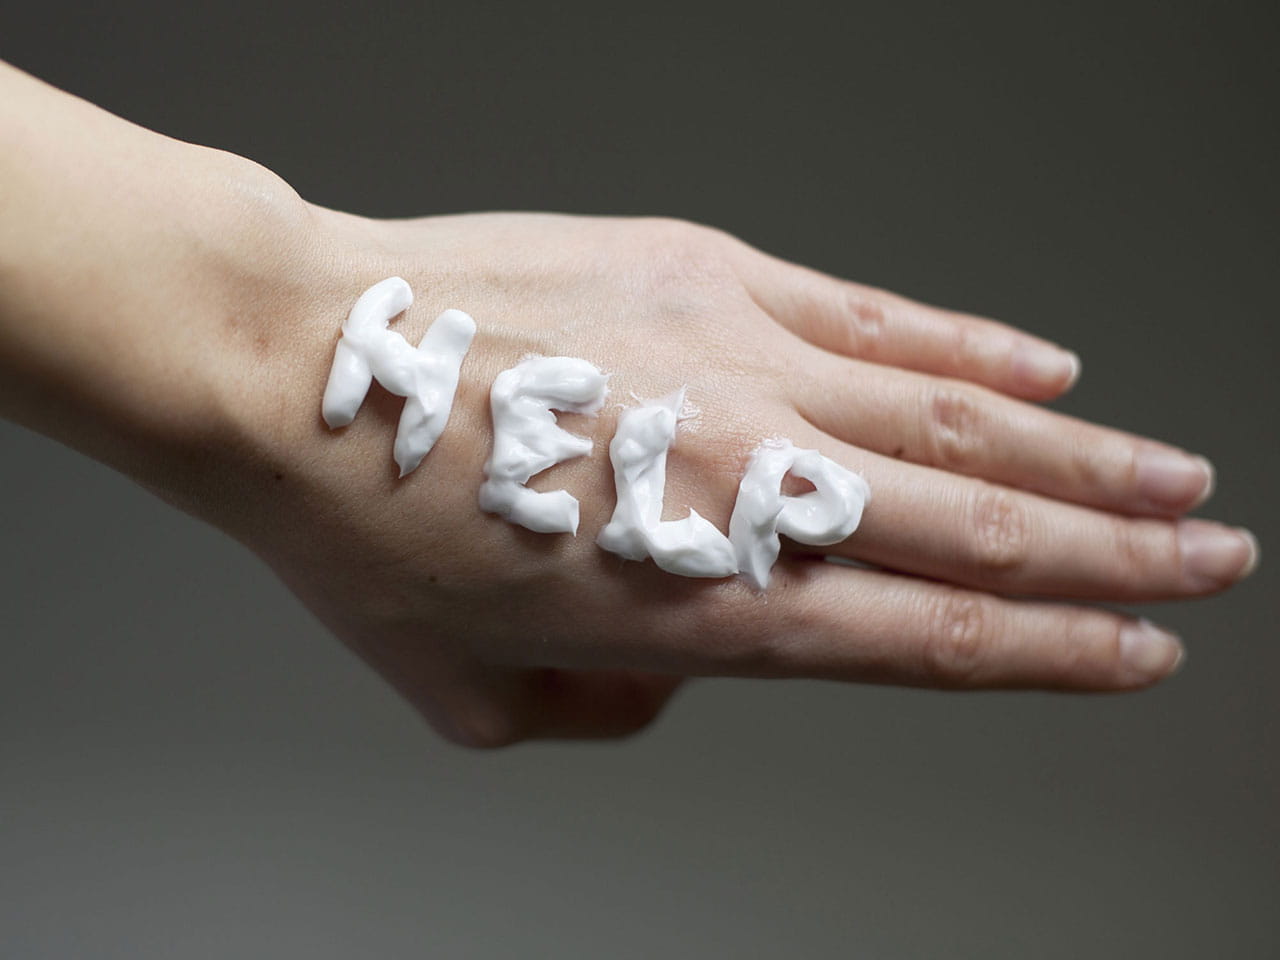 Ageing hand with help written on it in handcream